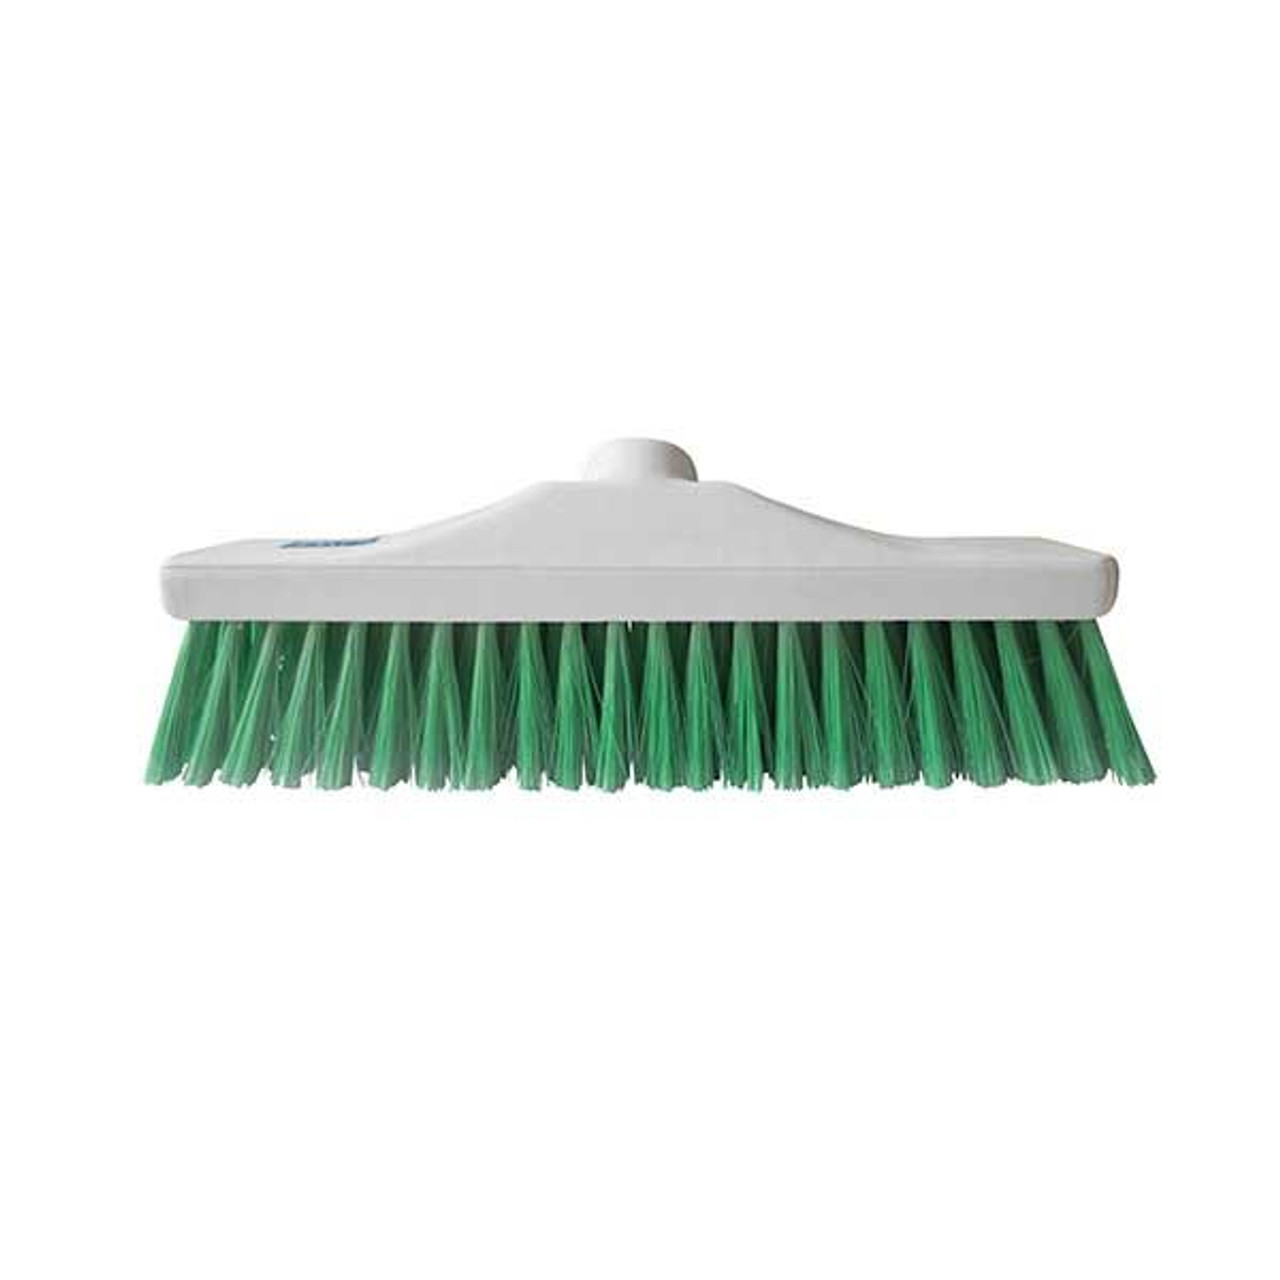 30cm Colour Coded Soft Broom Green